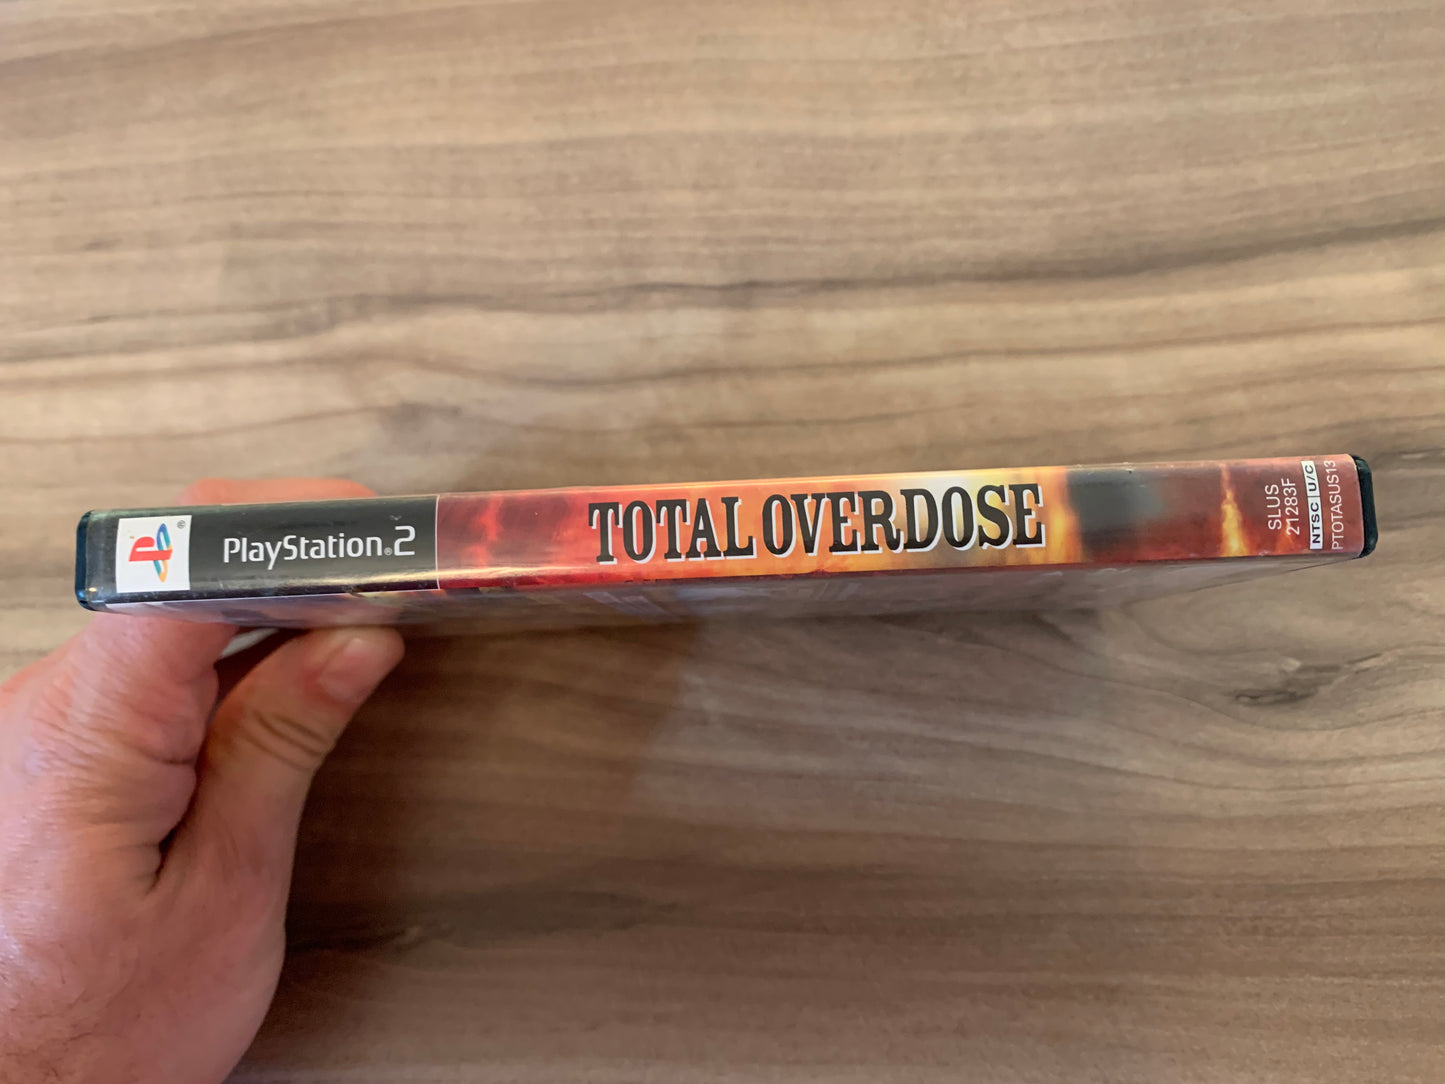 SONY PLAYSTATiON 2 [PS2] | TOTAL OVERSODOSE IN GUNSLINGERS TALE in MEXICO